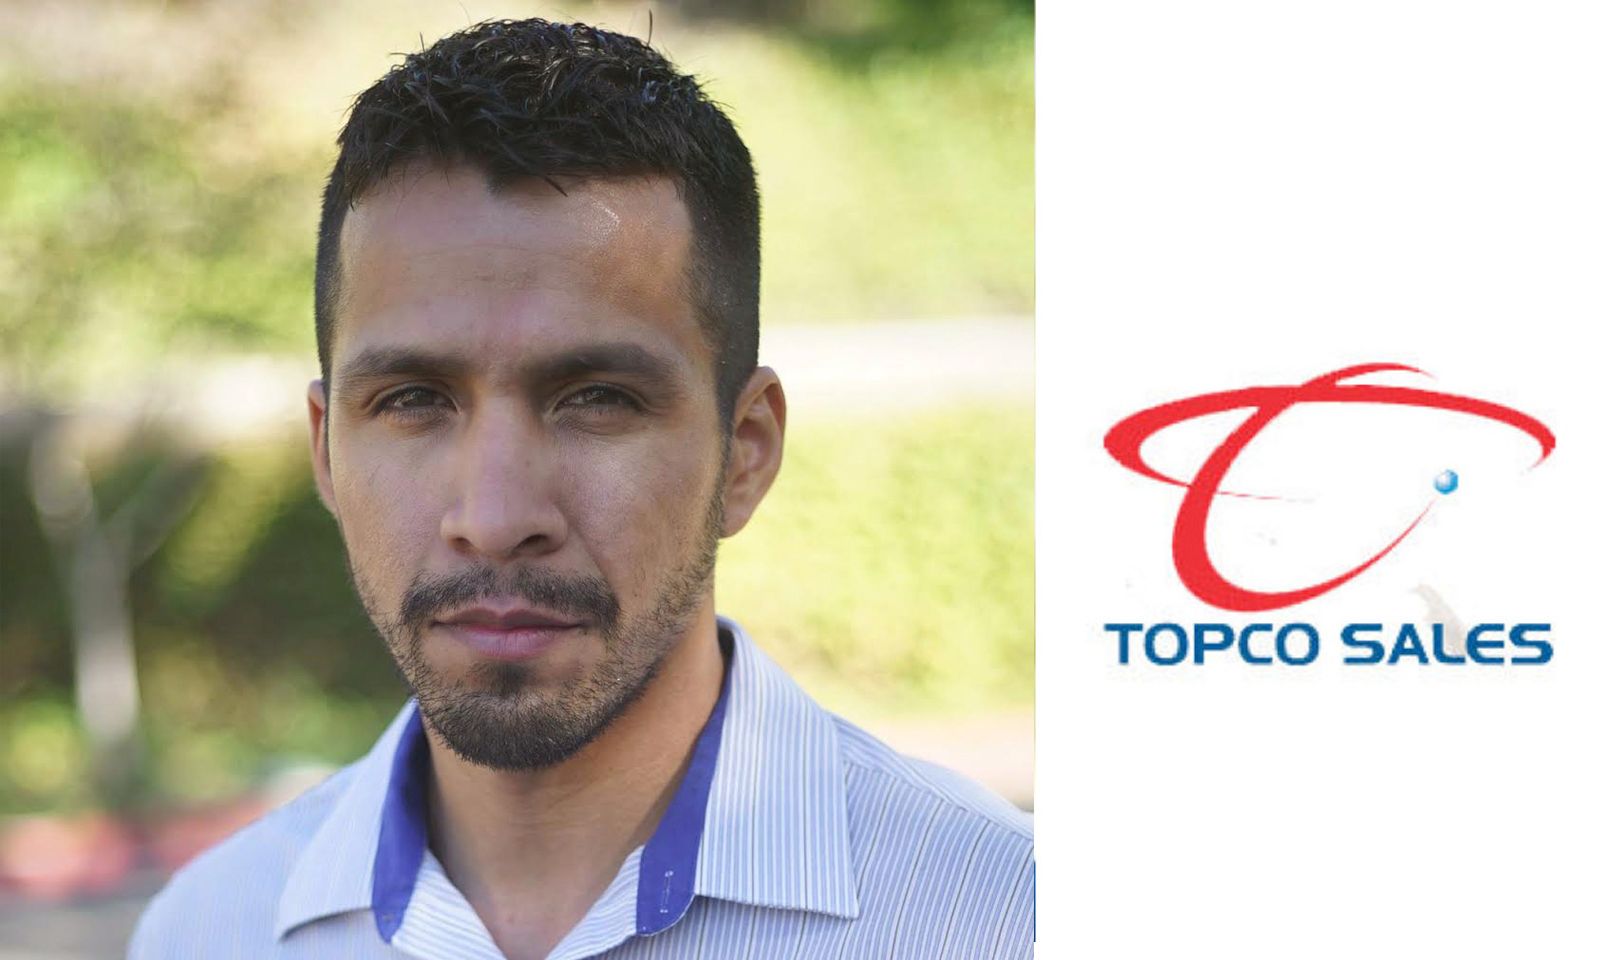 Anthony Morlett Tapped for Web Development at Topco Sales